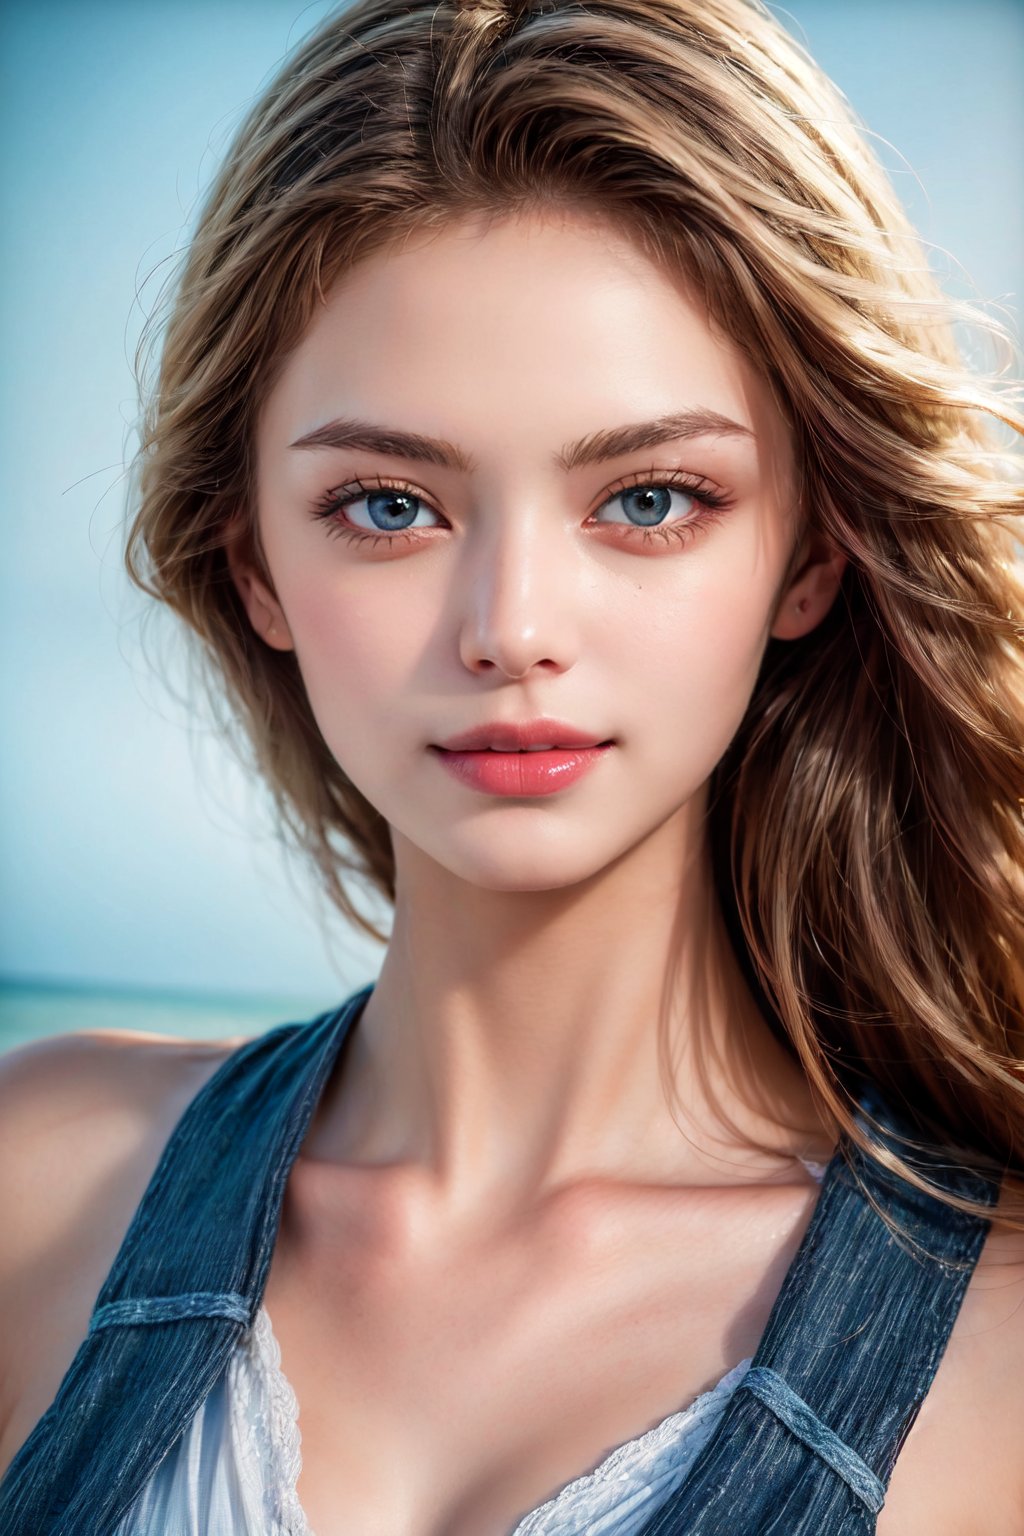 (masterpiece, high quality:1.5), 8K, HDR, 
1girl, well_defined_face, well_defined_eyes, ultra_detailed_eyes, ultra_detailed_face, by FuturEvoLab, 
ethereal lighting, immortal, elegant, porcelain skin, jet-black hair, waves, pale face, ice-blue eyes, blood-red lips, pinhole photograph, retro aesthetic, monochromatic backdrop, mysterious, enigmatic, timeless allure, the siren of the night, secrets, longing, hidden dangers, captivating, nostalgia, timeless fascination, Edge feathering and holy light, Exquisite face, 